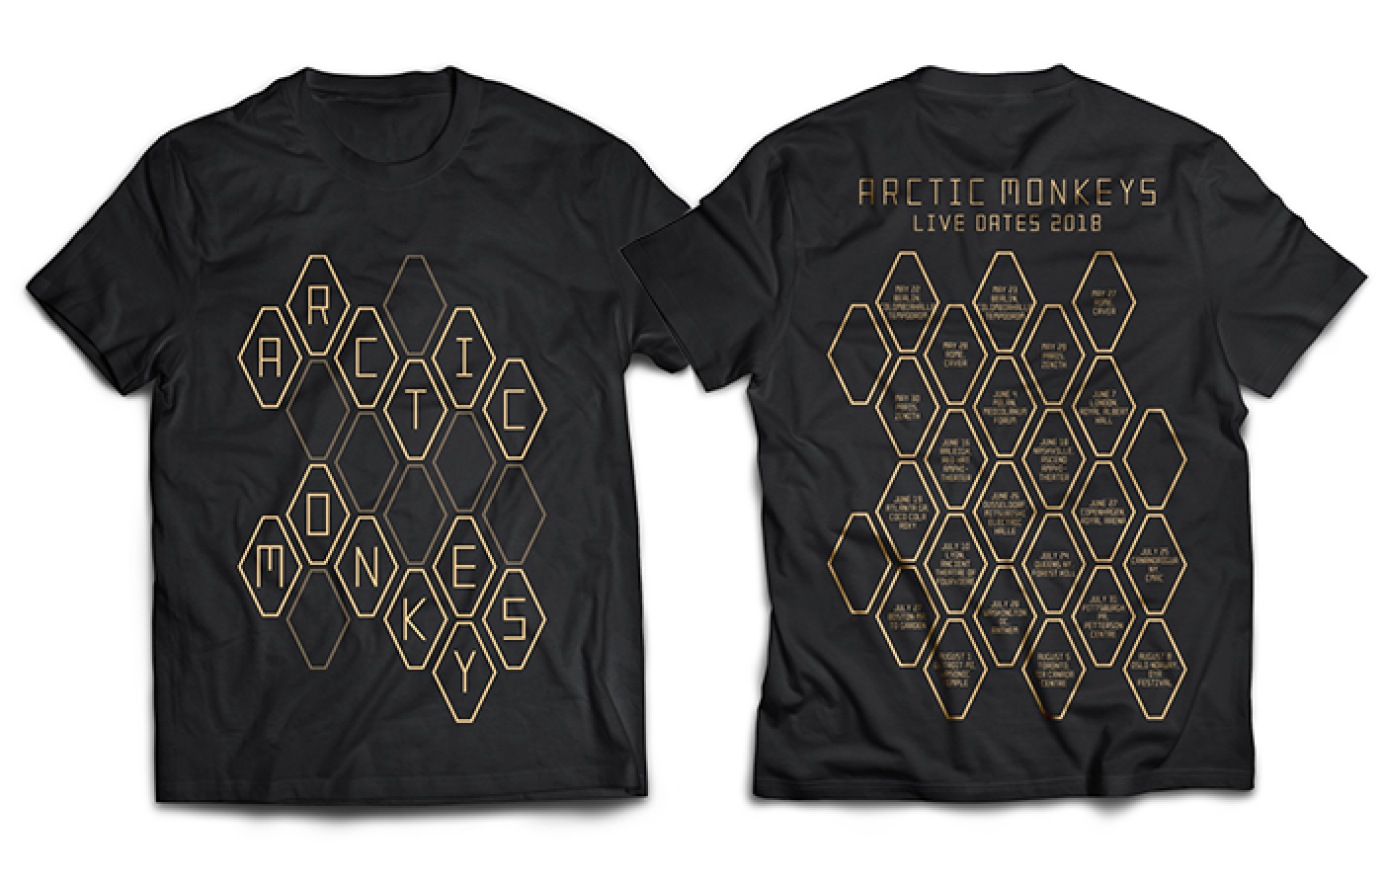 Merchandise for Arctic Monkeys by Fursss